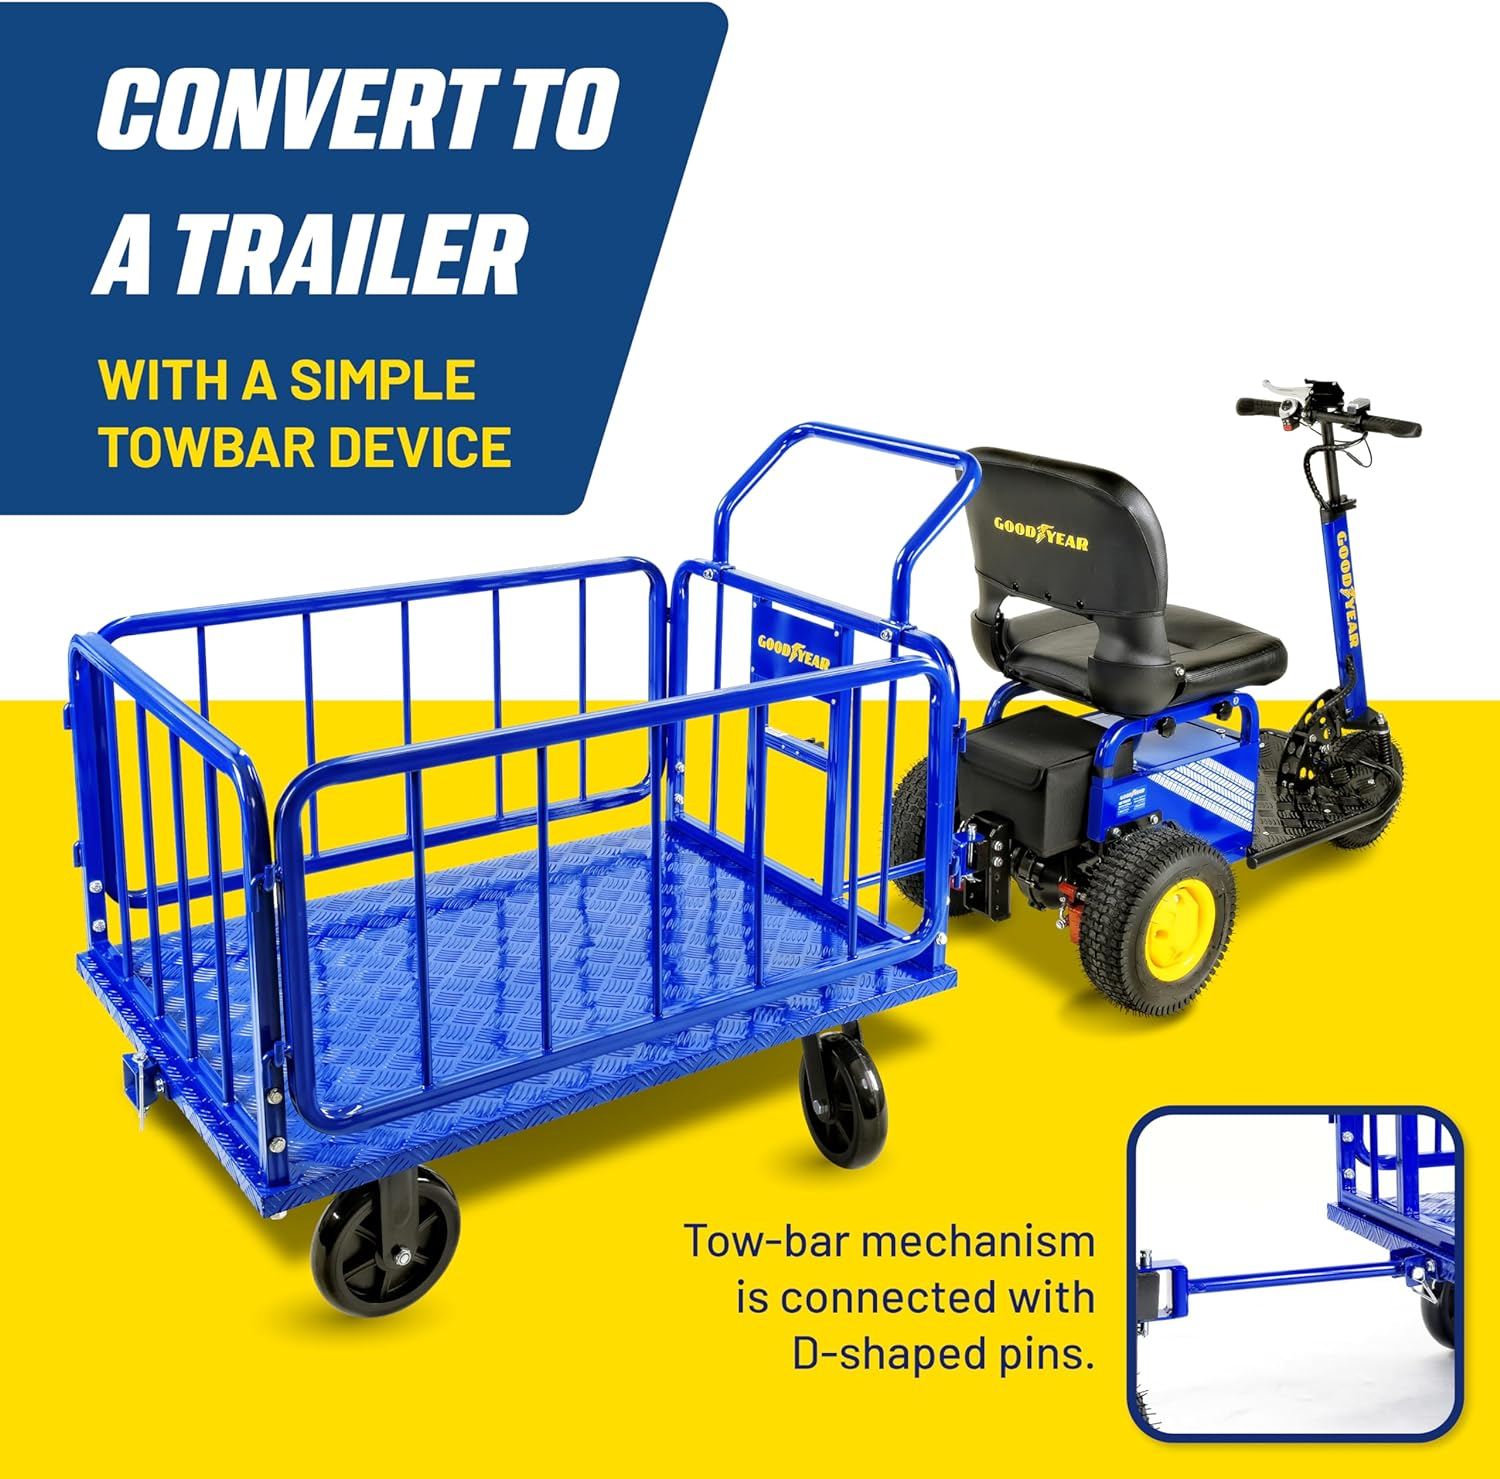 Goodyear GUO105 Cargo Trailer Heavy Duty Utility Cart 1200 lbs Load Capacity 8" Casters Compatible with Electric Tugger Cart New